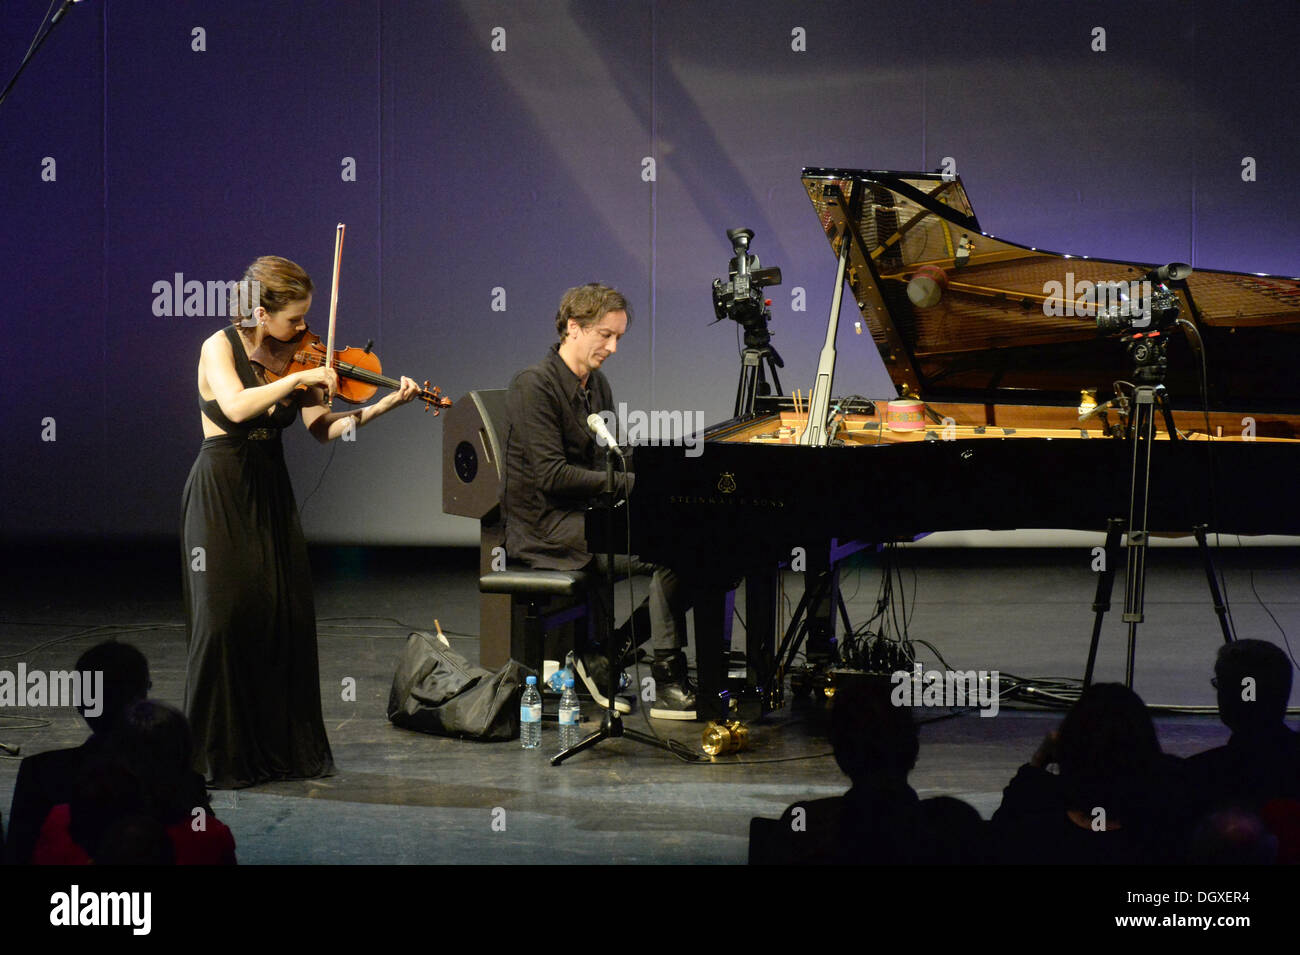 Munich, Germany. 26th Oct, 2013. US violinist Hilary Hahn and the German  pianist and composer Hauschka present their joint improvisation 'Silfra' at  the classical music event 'Klassik & Lounge in der BMW